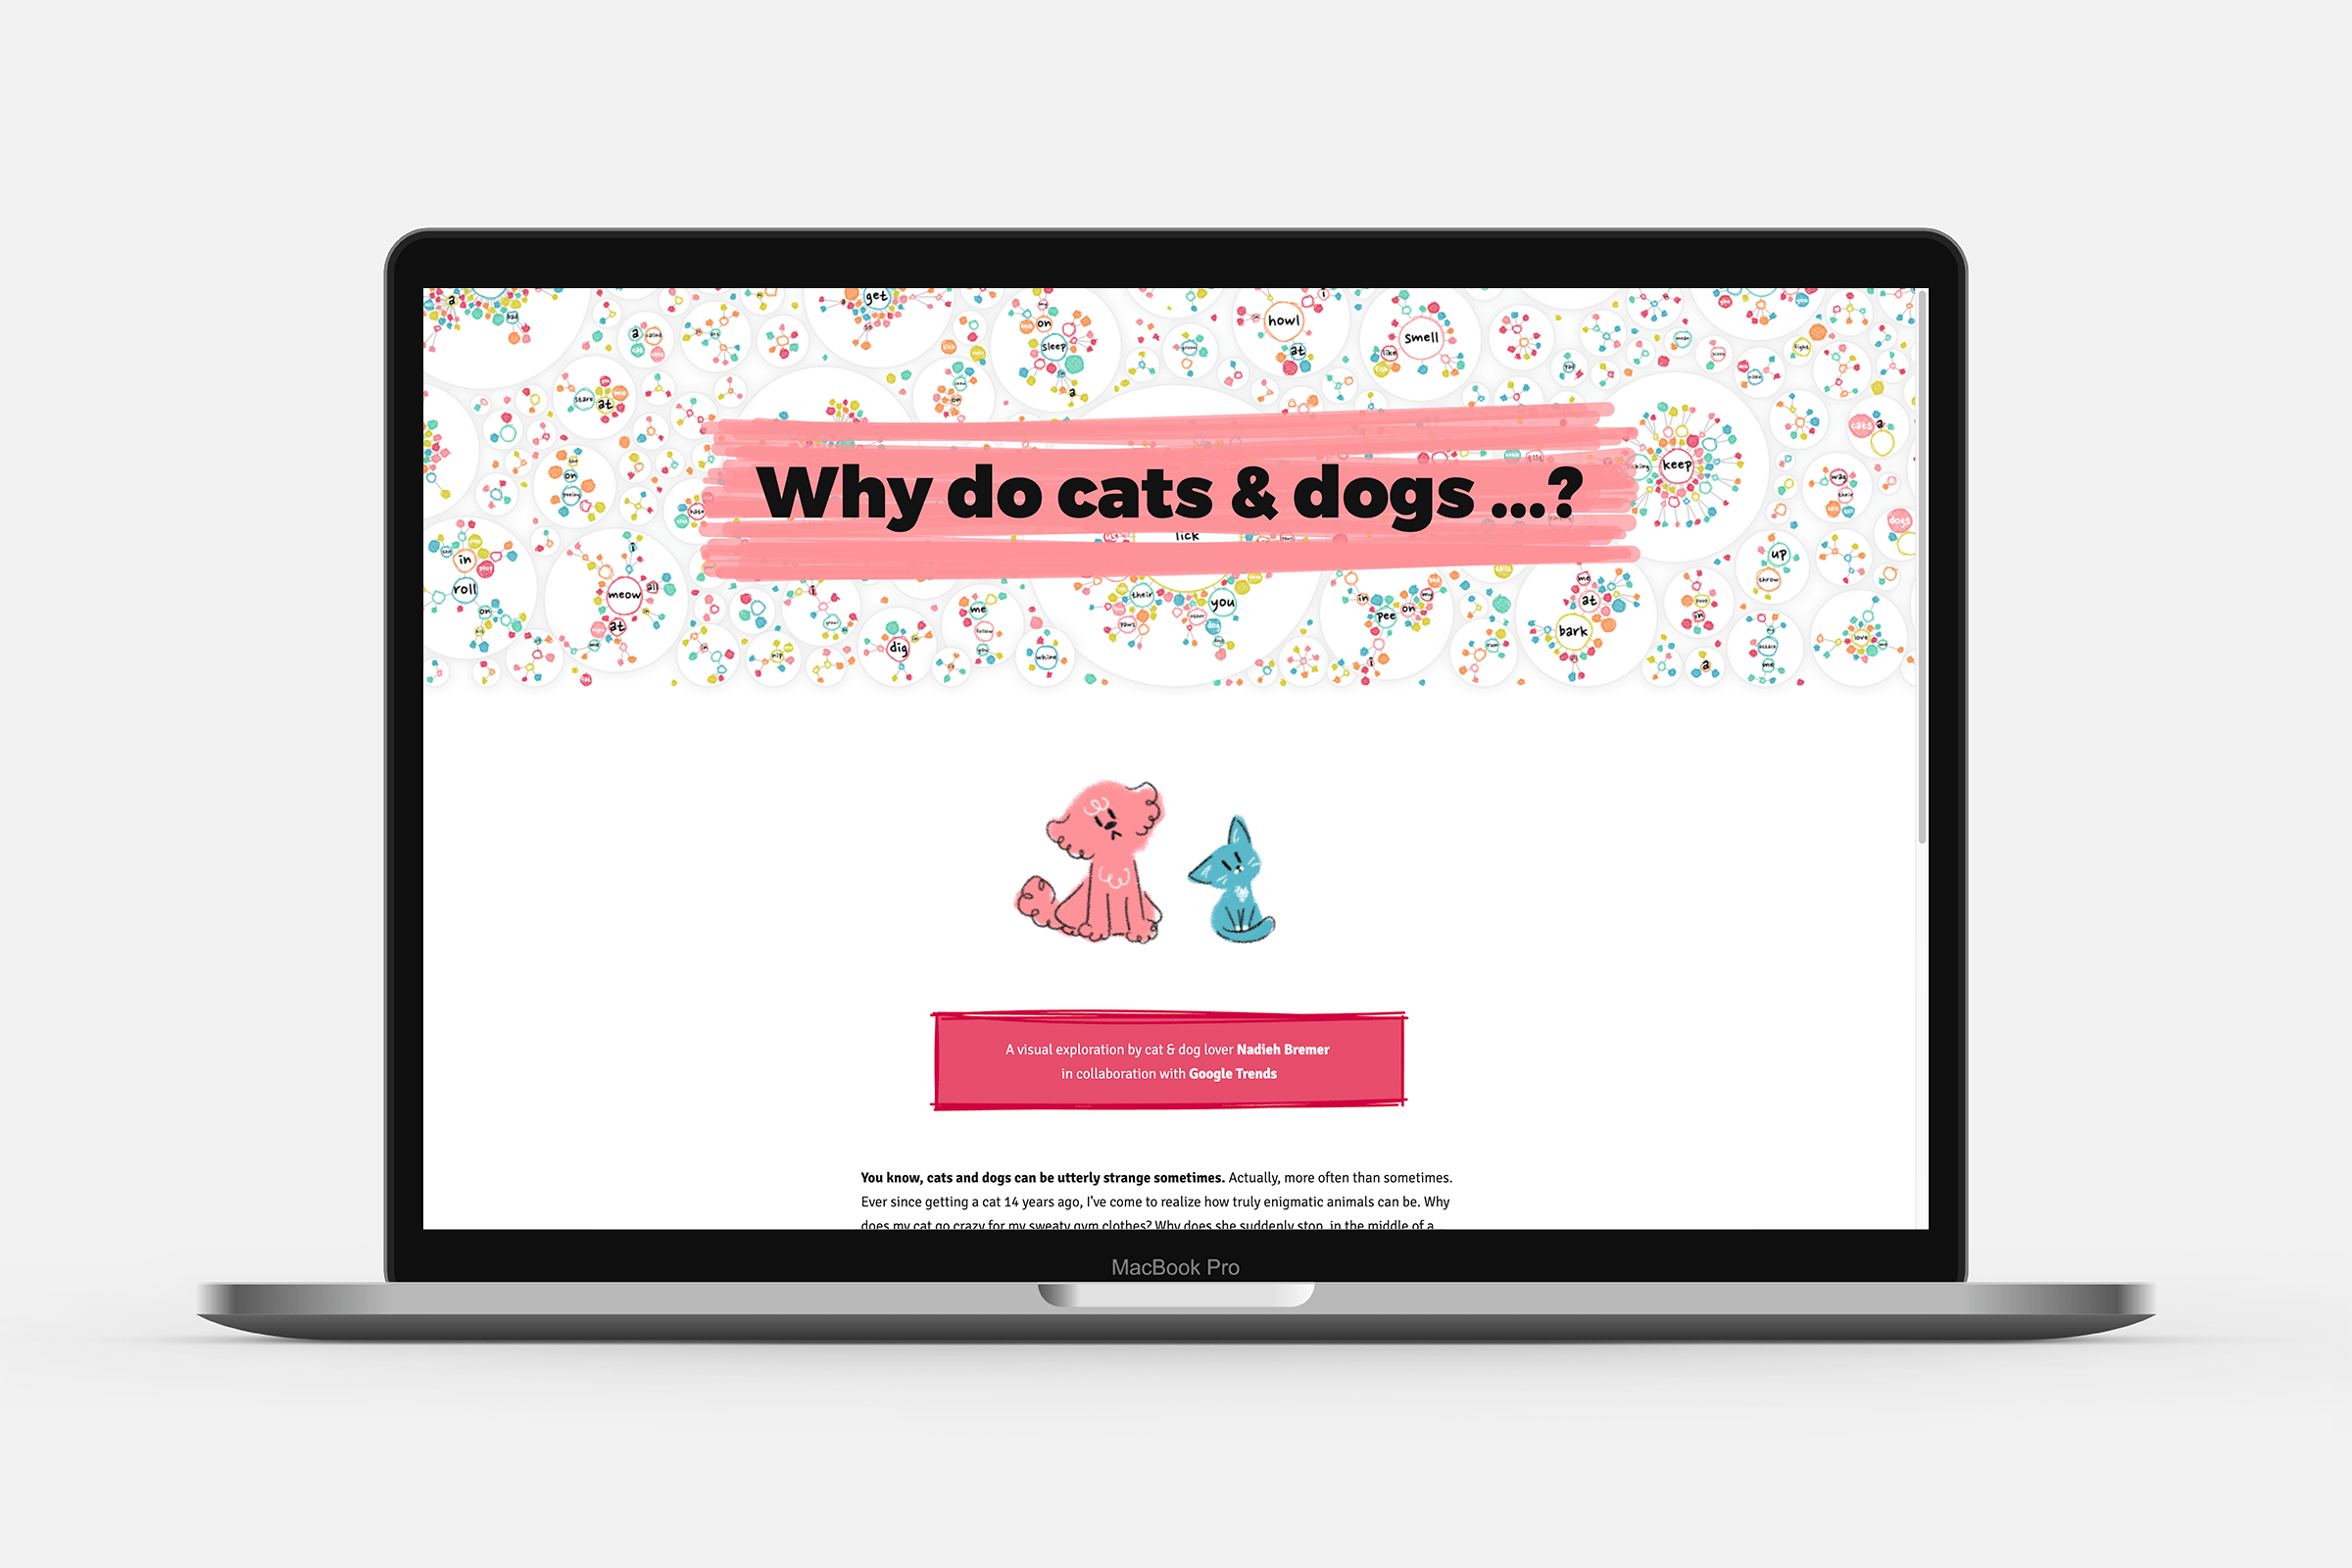 The starting page of the project that lets you choose between cats and dogs